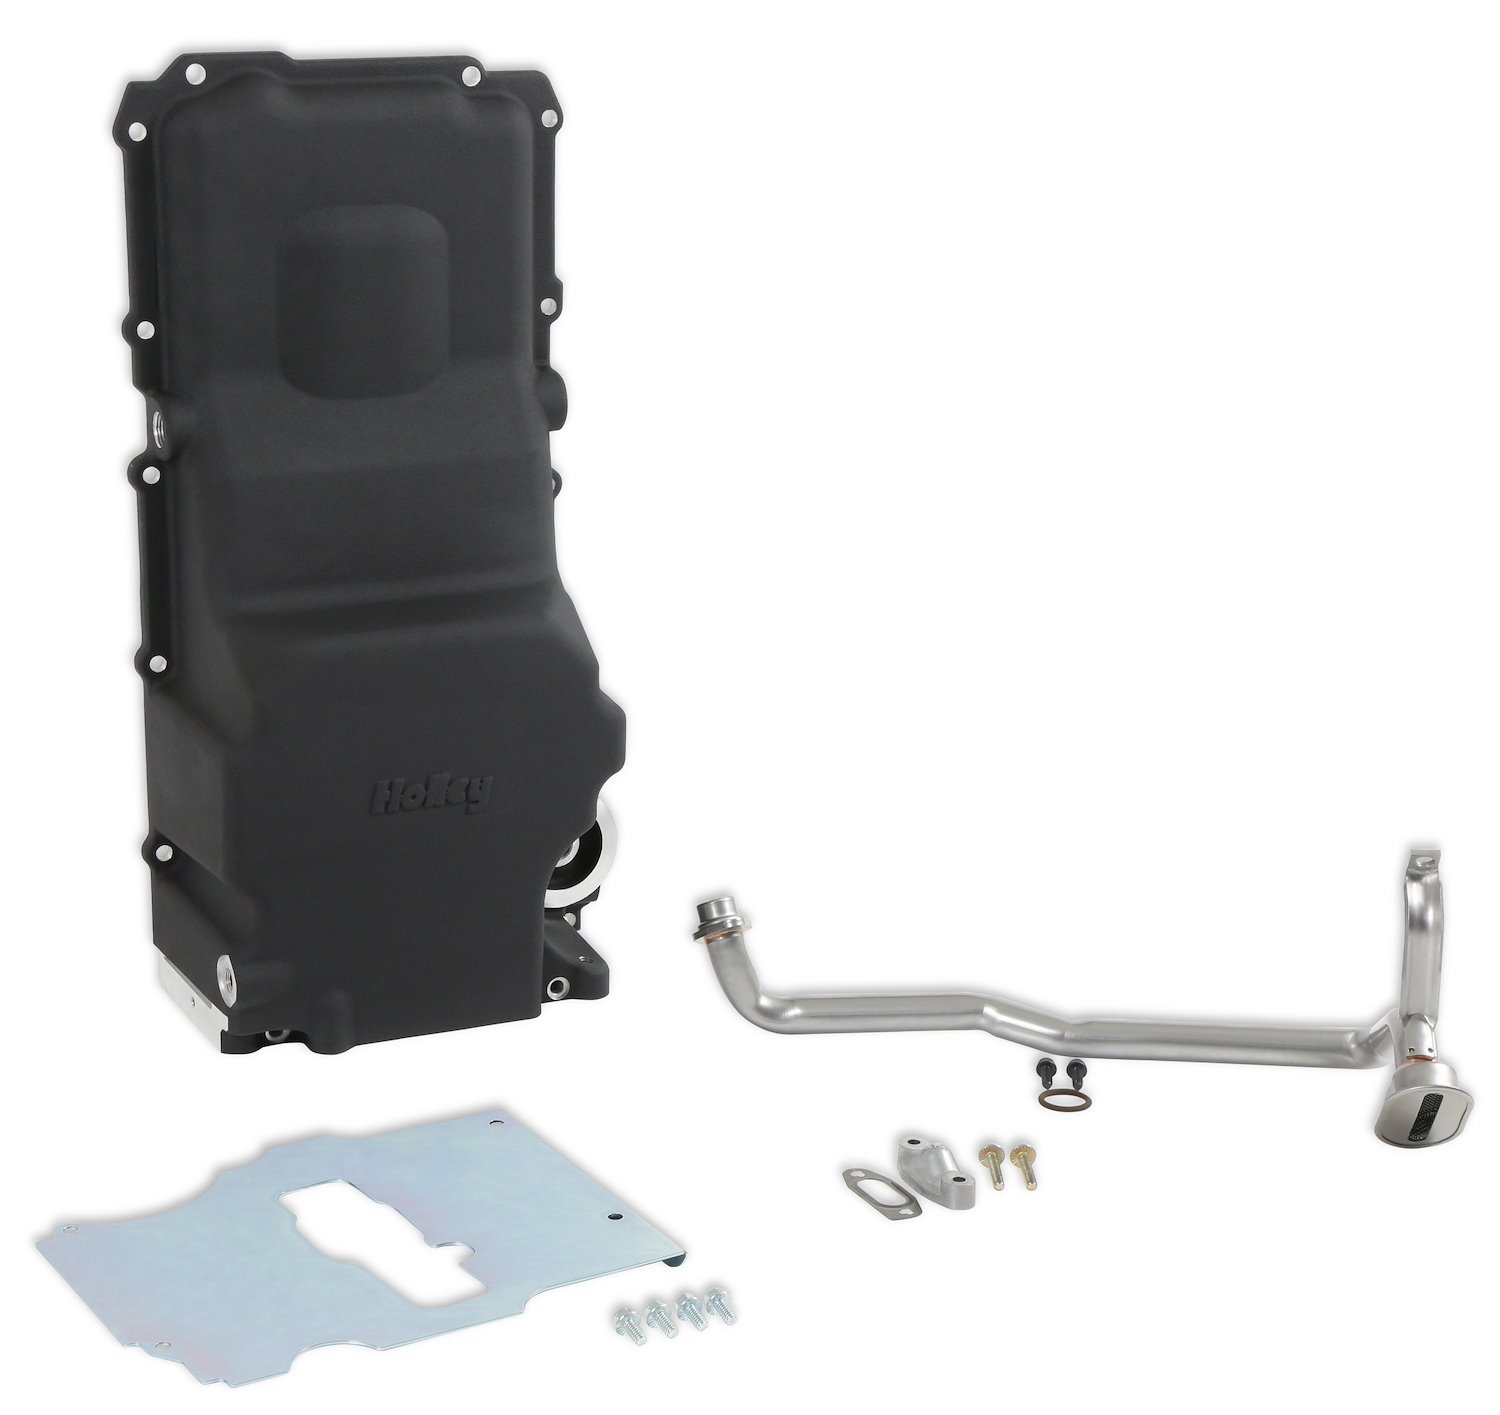 GM LS Engine Swap Oil Pan for 1979-1993